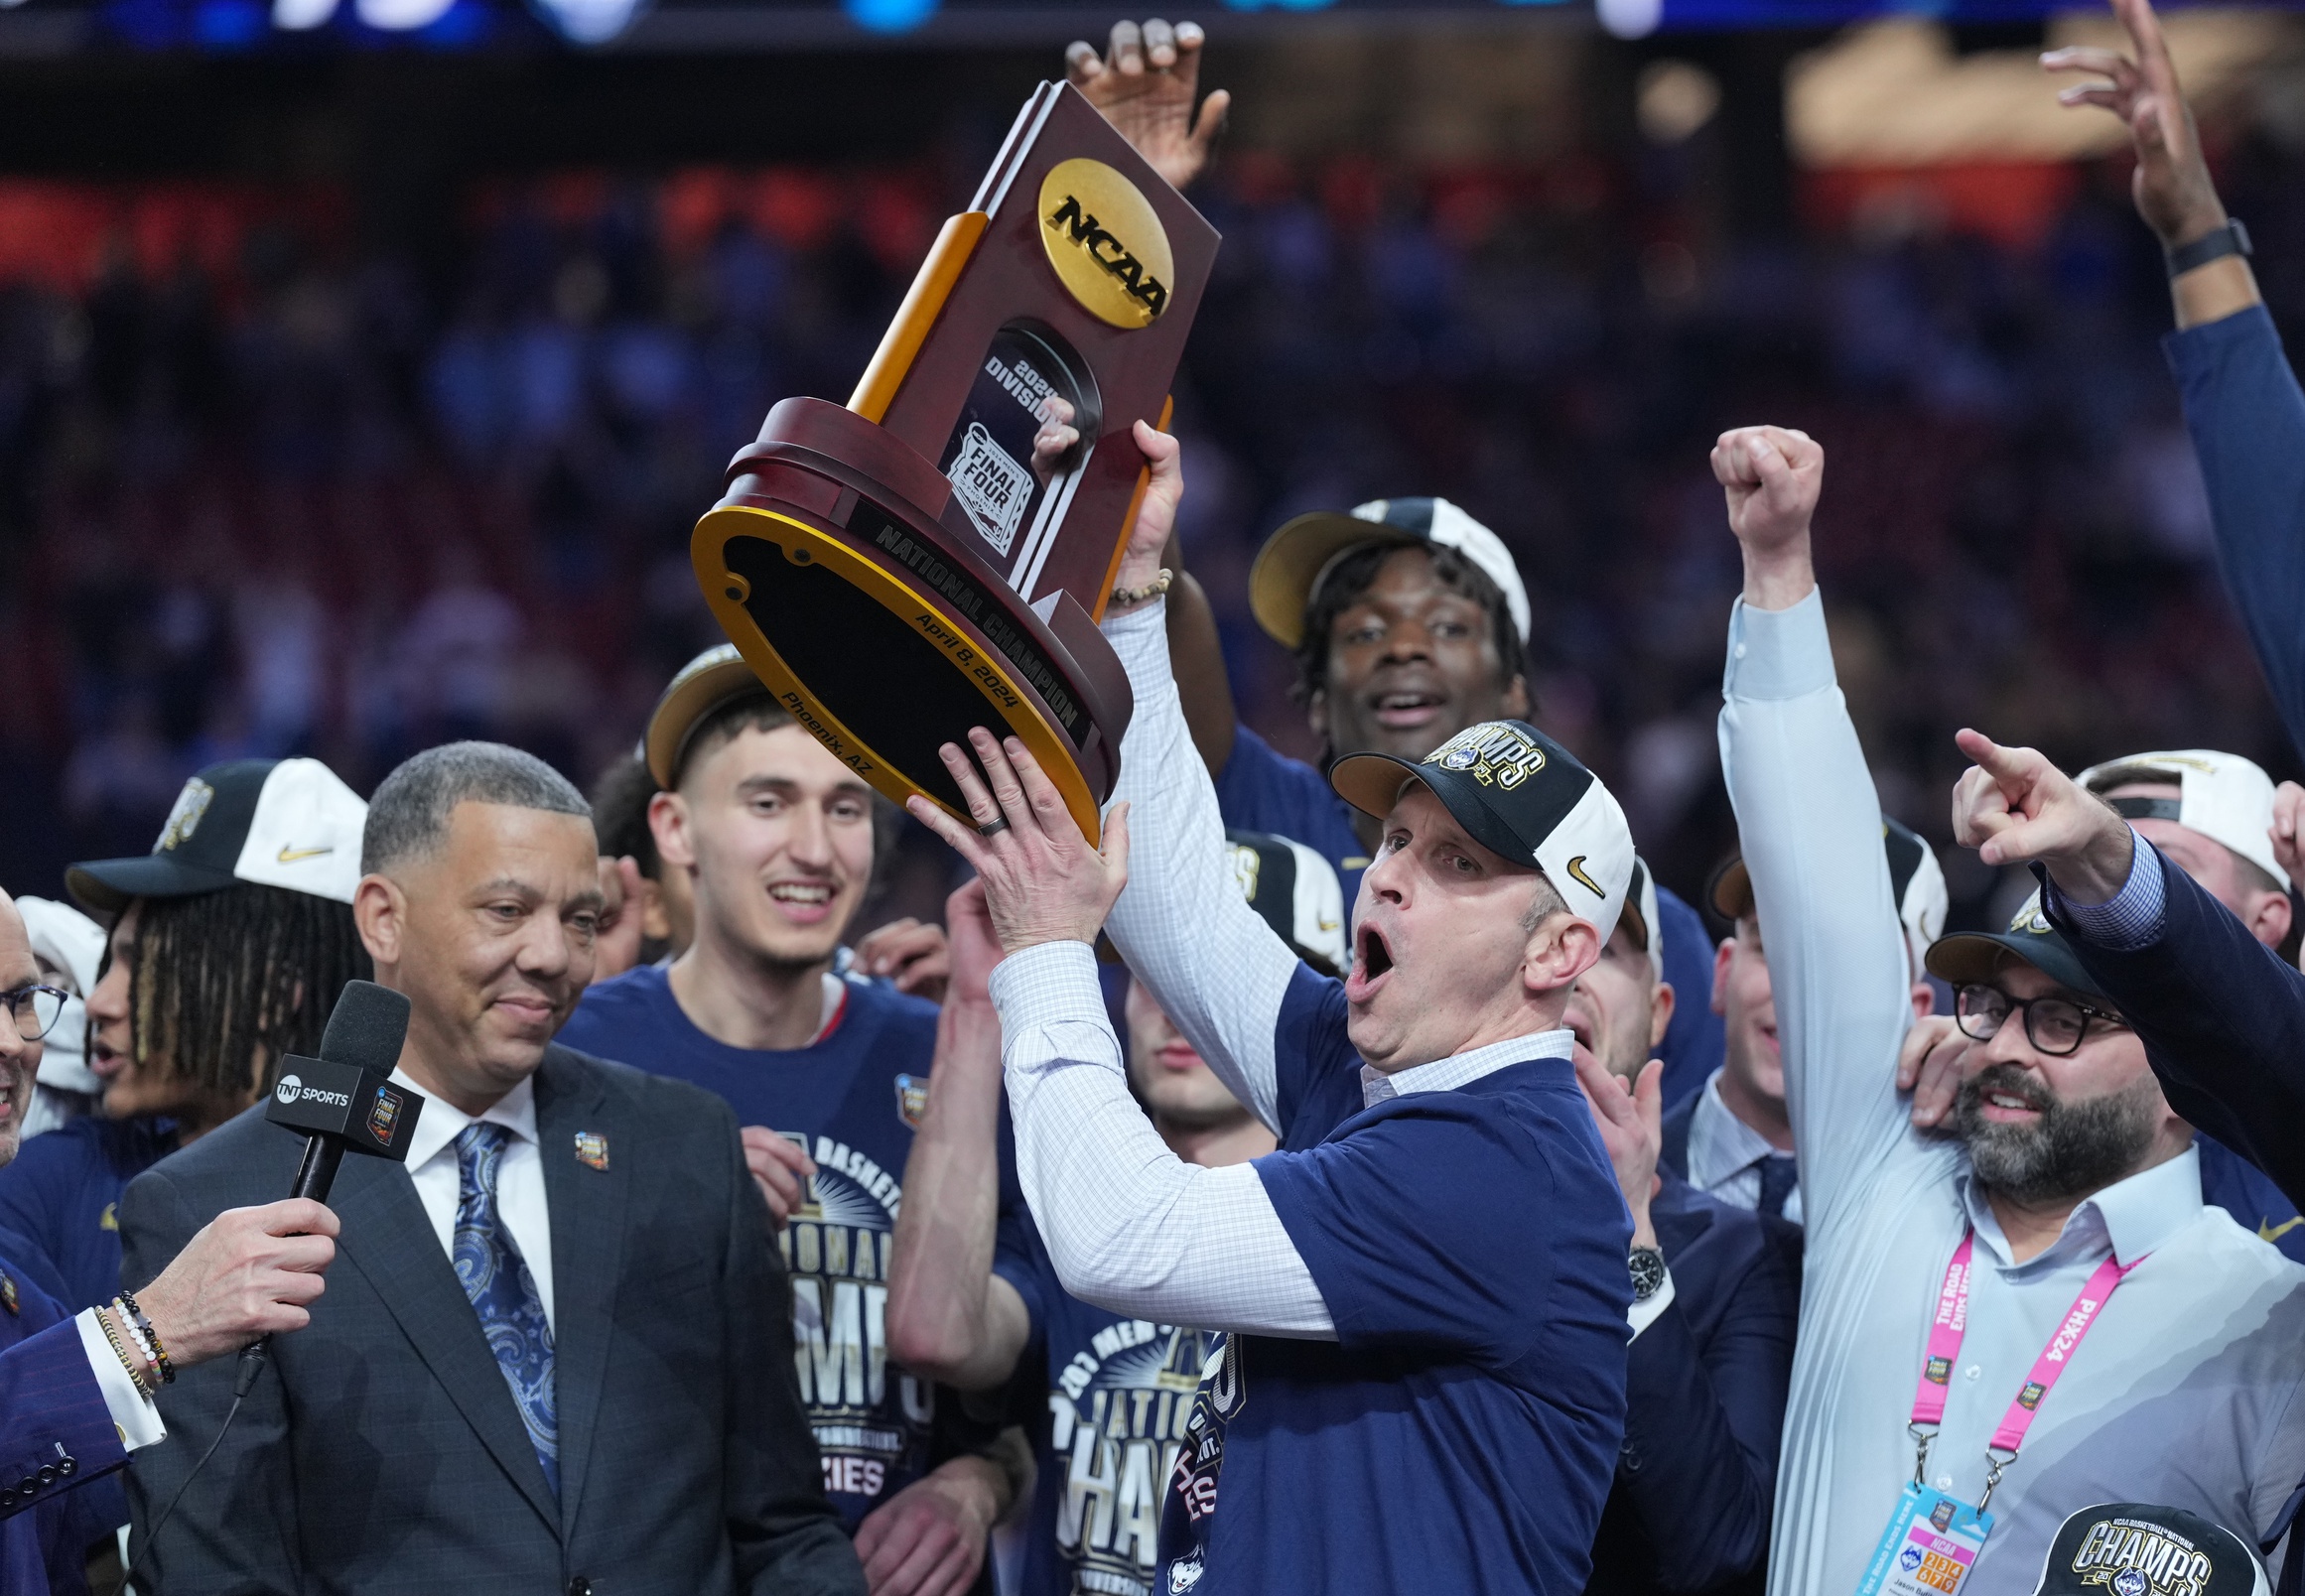 Apr 8, 2024; Glendale, AZ, USA; Connecticut Huskies head coach Dan Hurley hoists the championship trophy after defeating the Purdue Boilermakers in the national championship game of the Final Four of the 2024 NCAA Tournament at State Farm Stadium. Mandatory Credit: Robert Deutsch-USA TODAY Sports